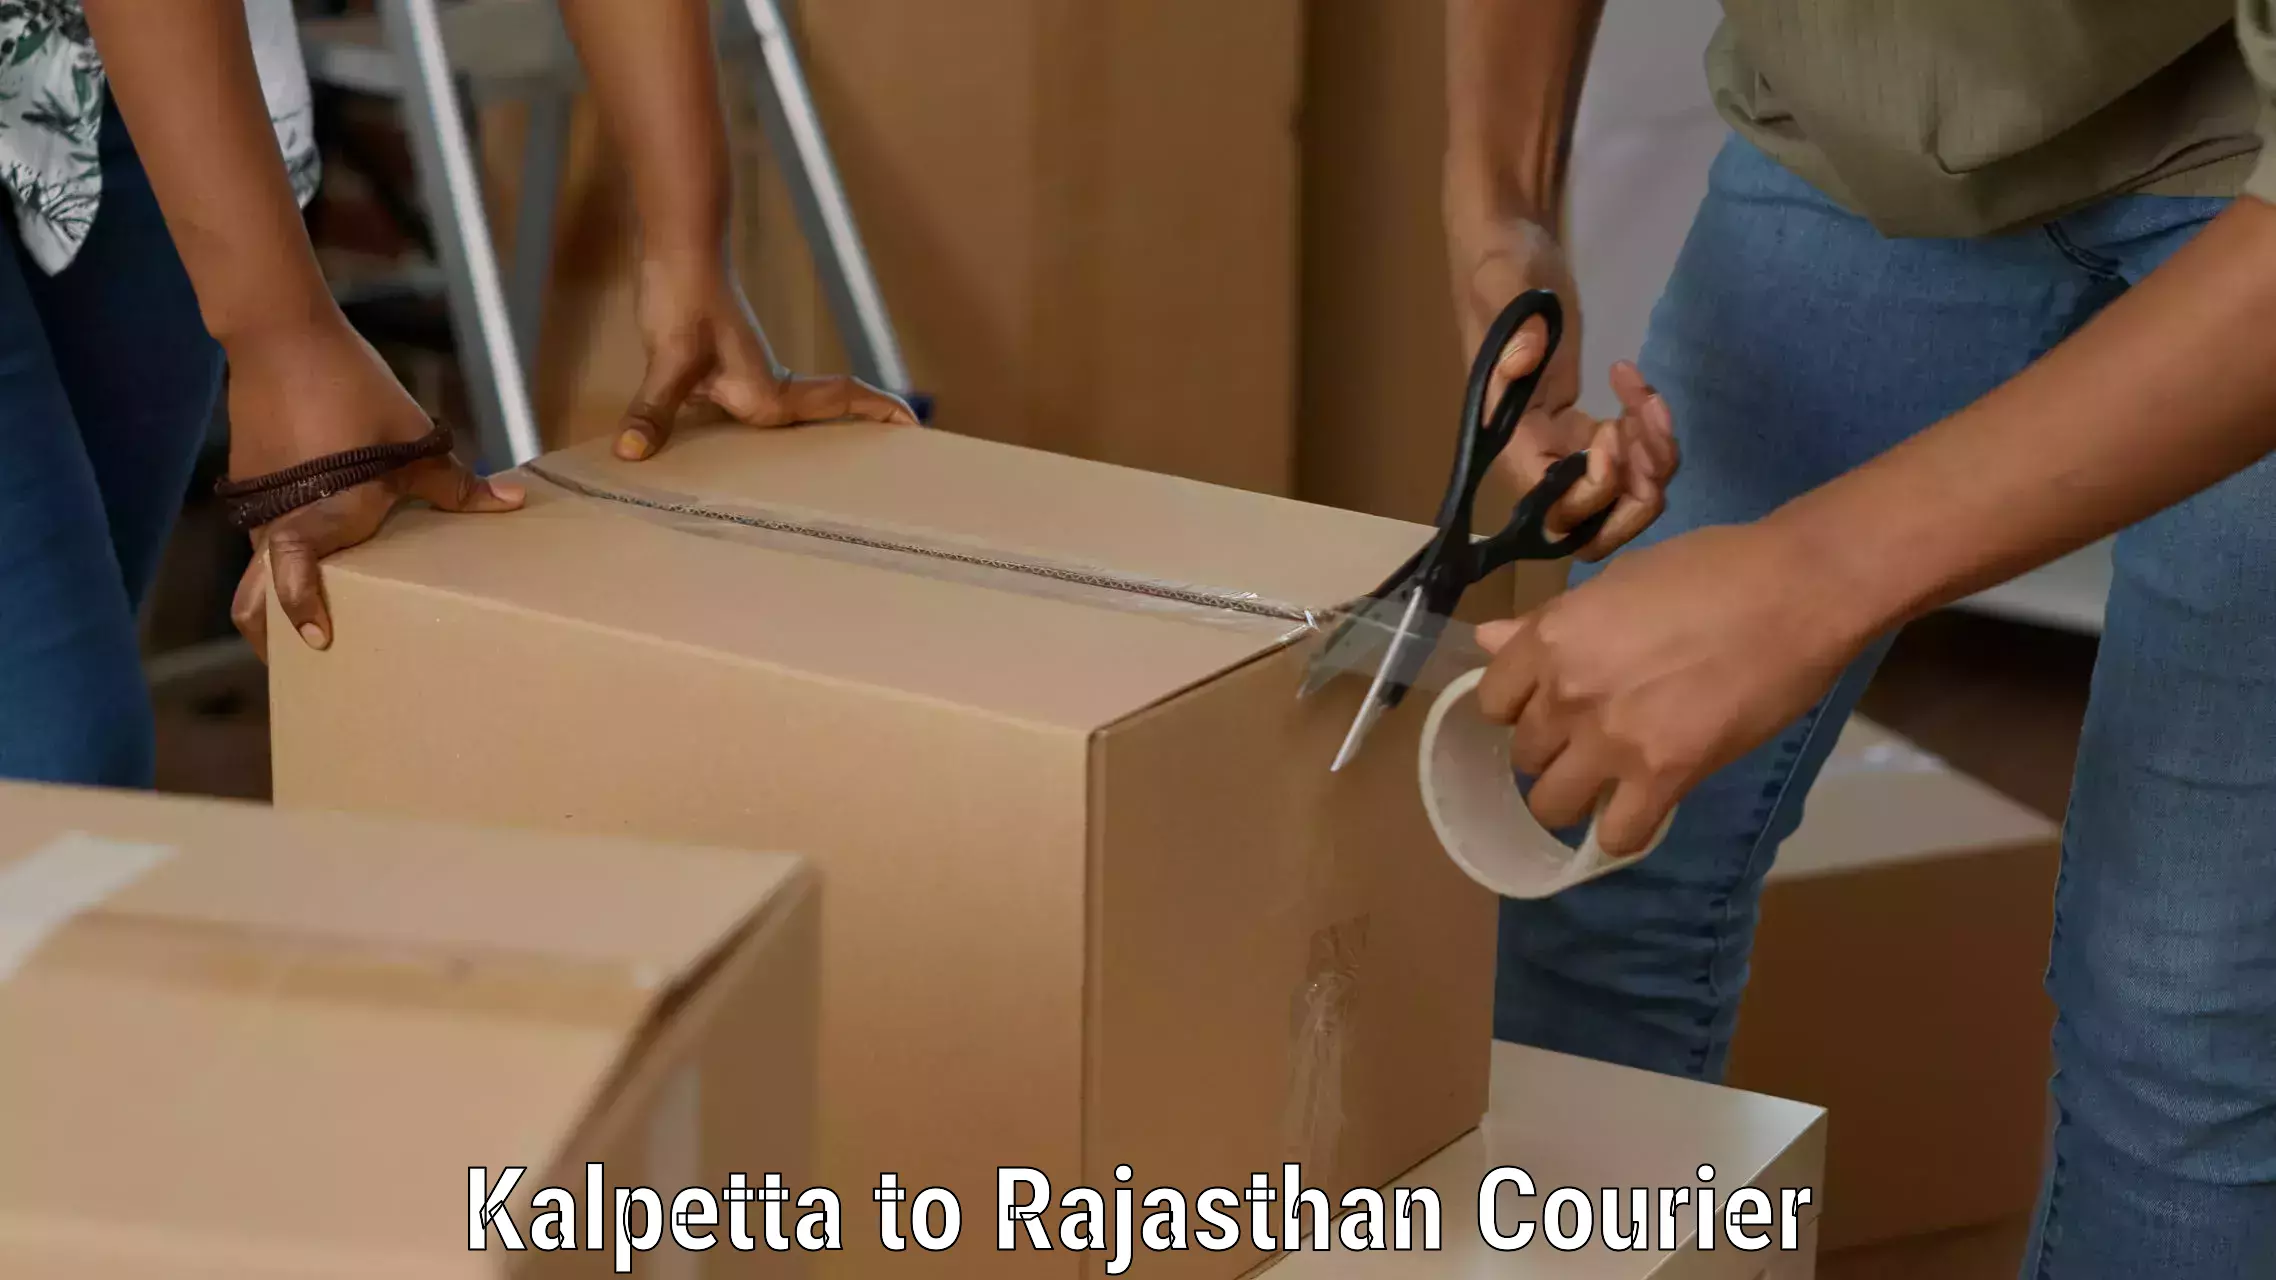 User-friendly delivery service Kalpetta to Yeswanthapur